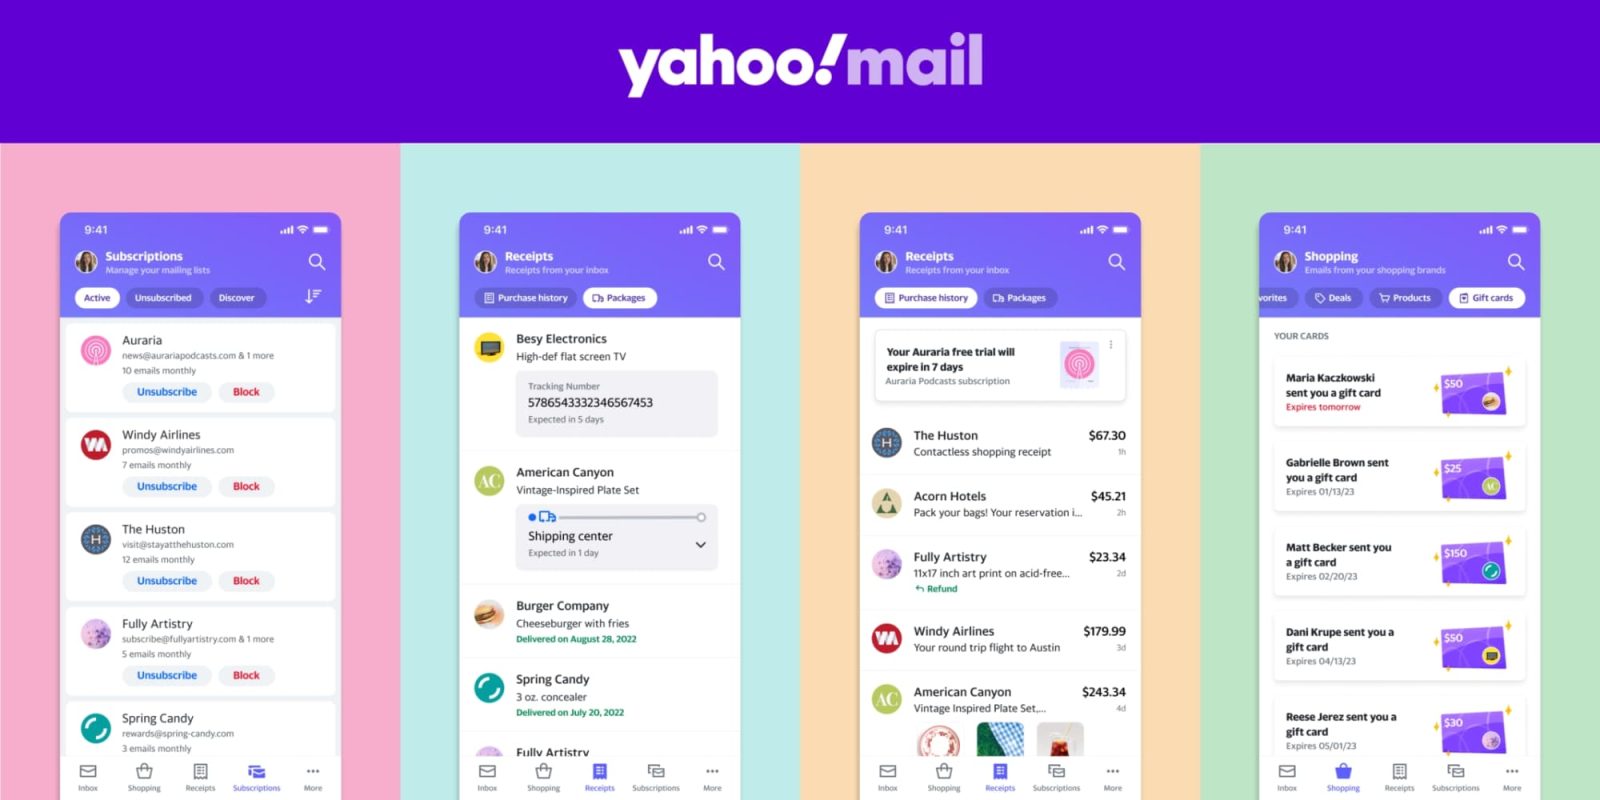 Do I have to upgrade to the new Yahoo Mail?